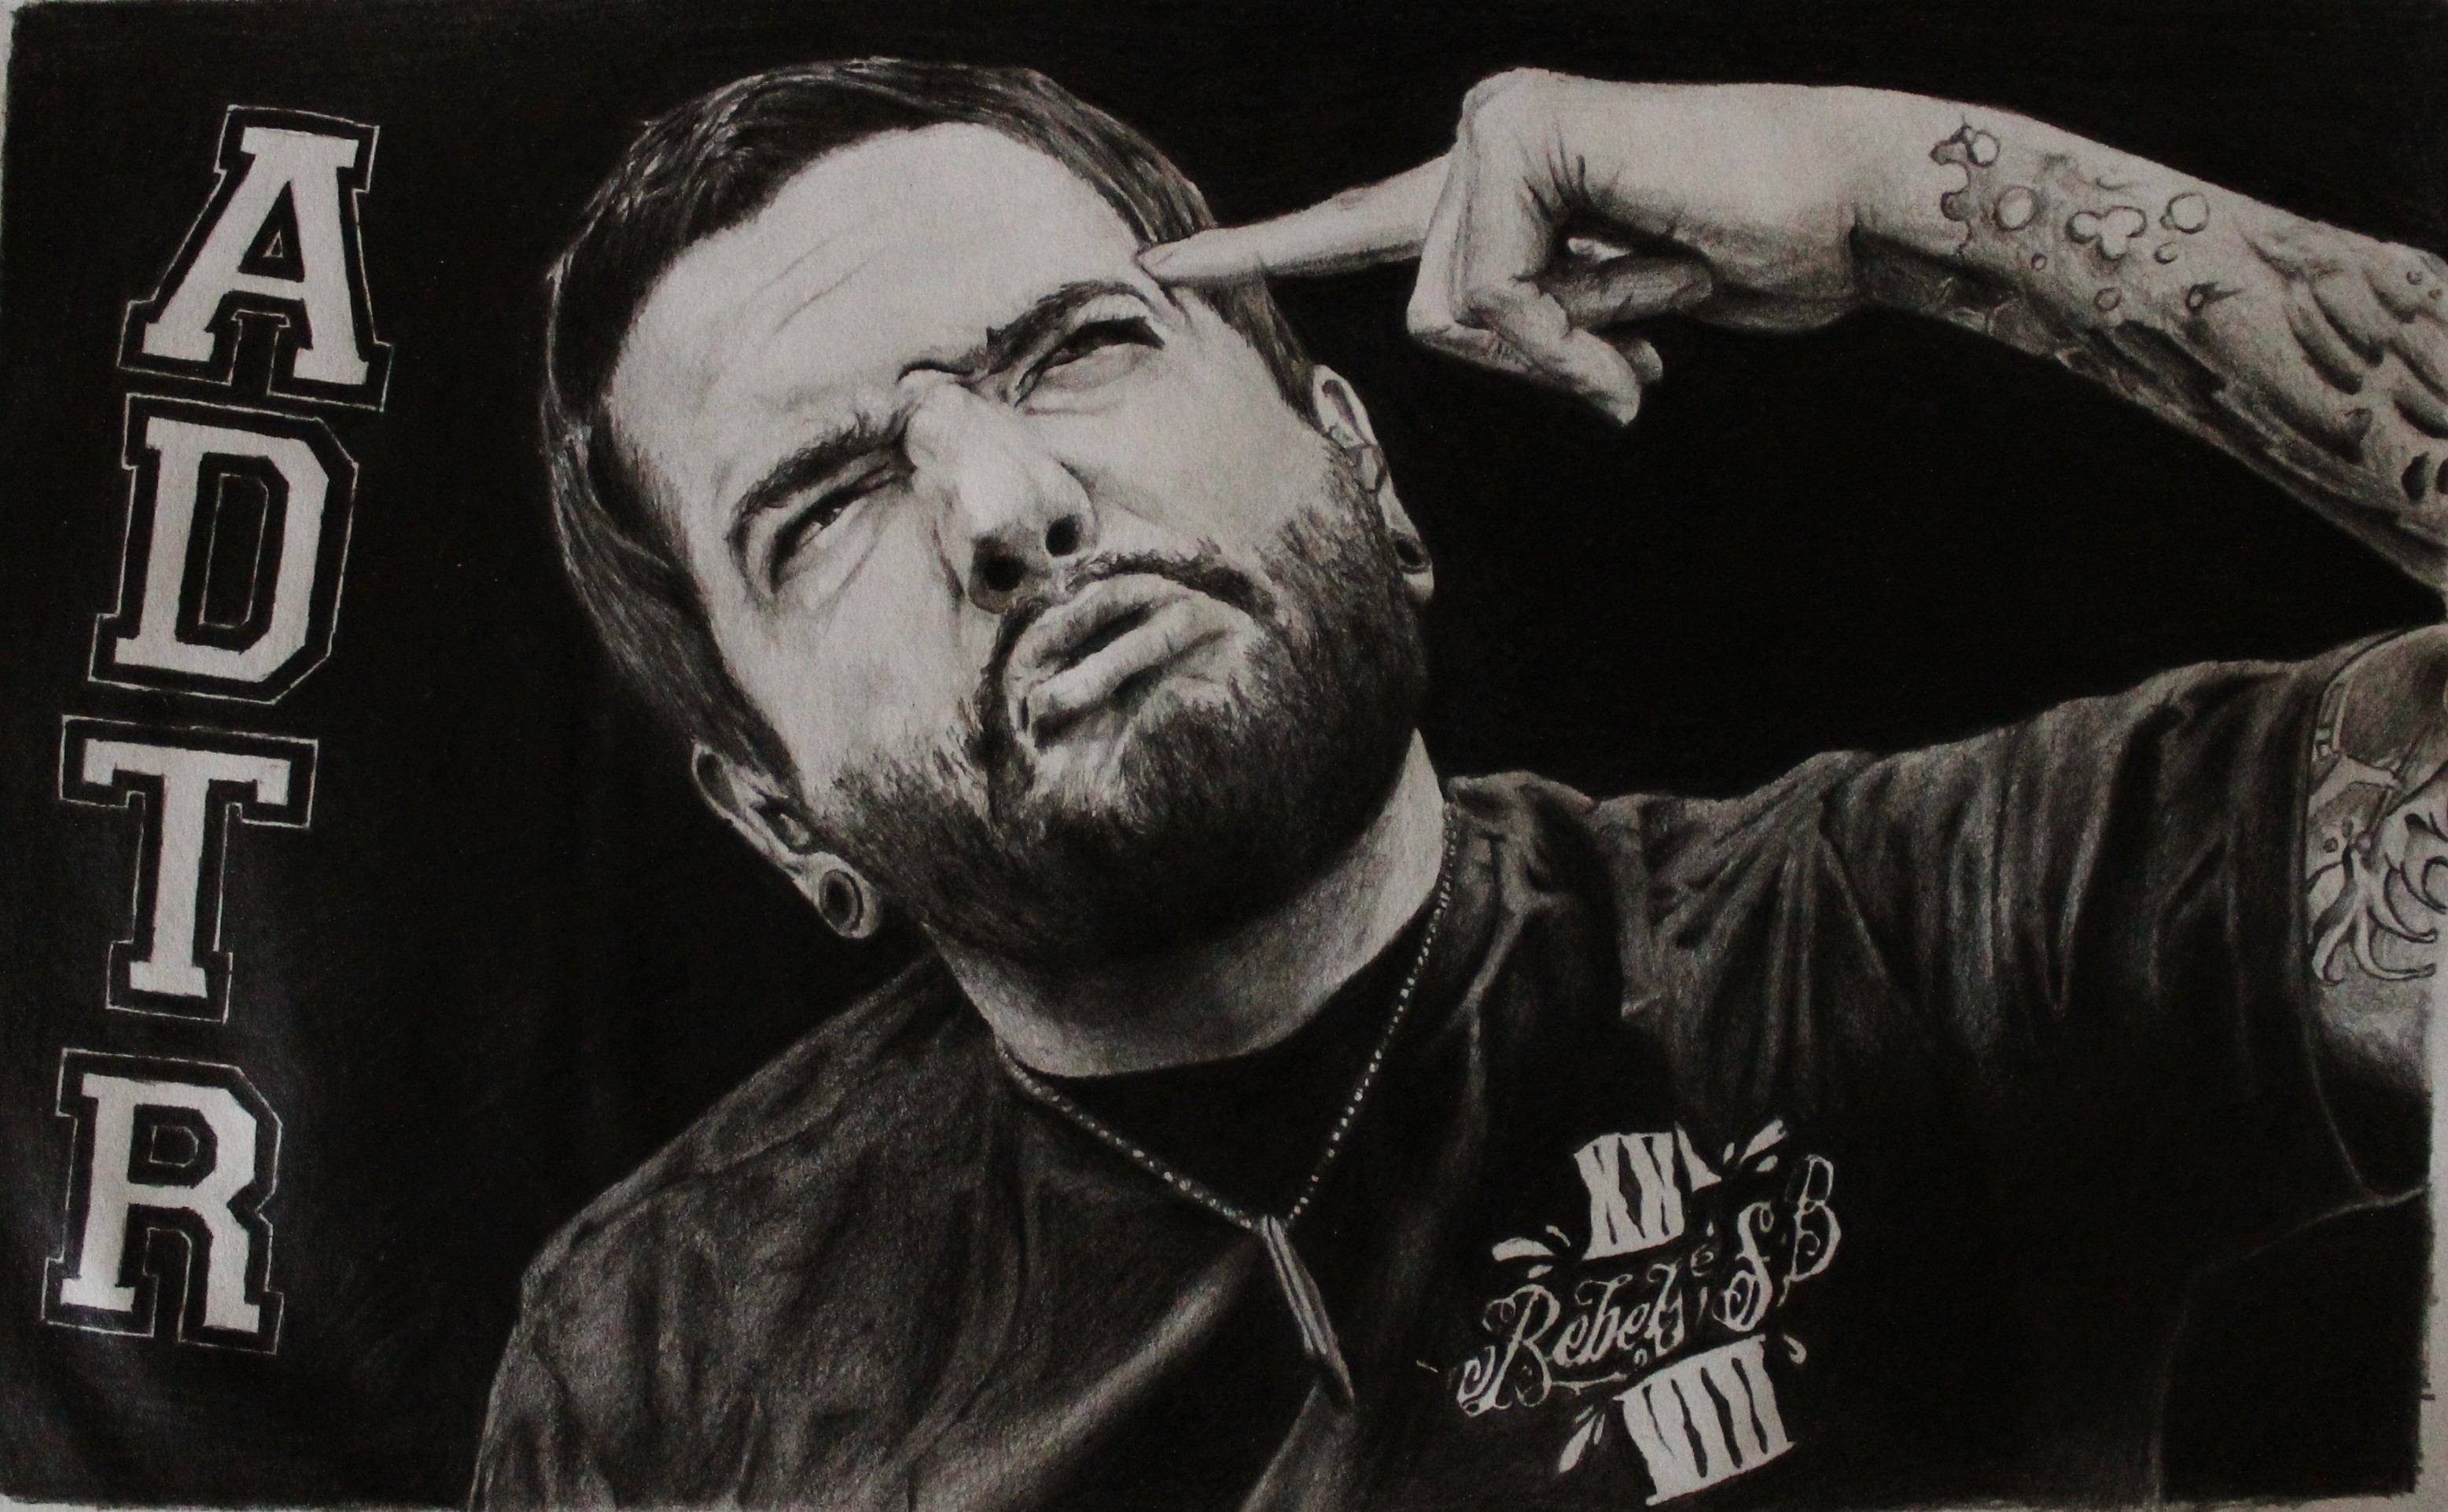 3113x1923 ... Jeremy Mckinnon of A Day To Remember. by AitorLicantropo